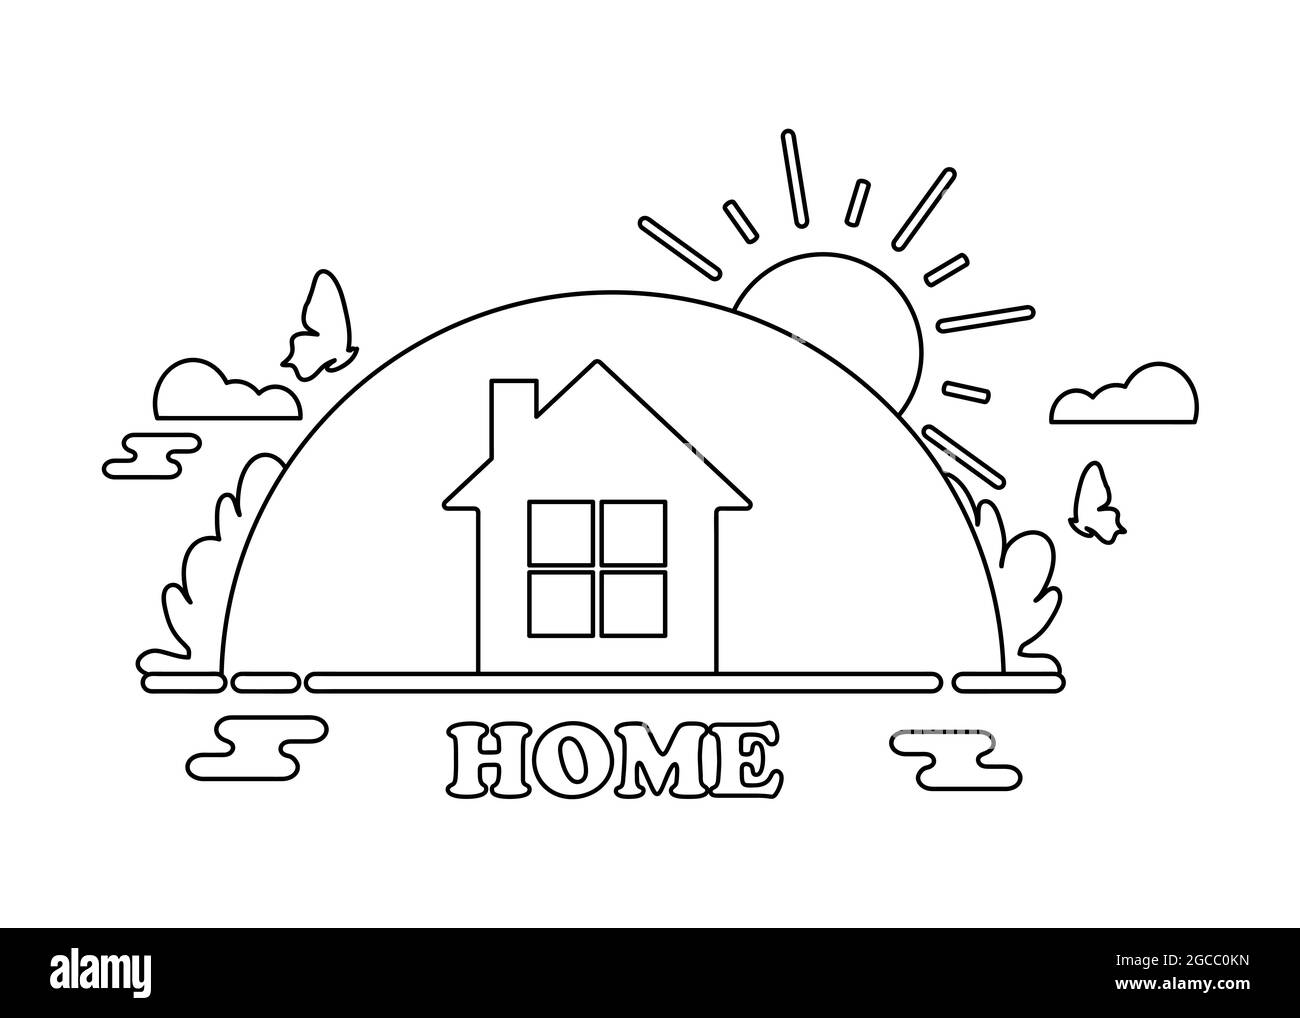 home coloring page. coloring page for children. on white background Stock Photo